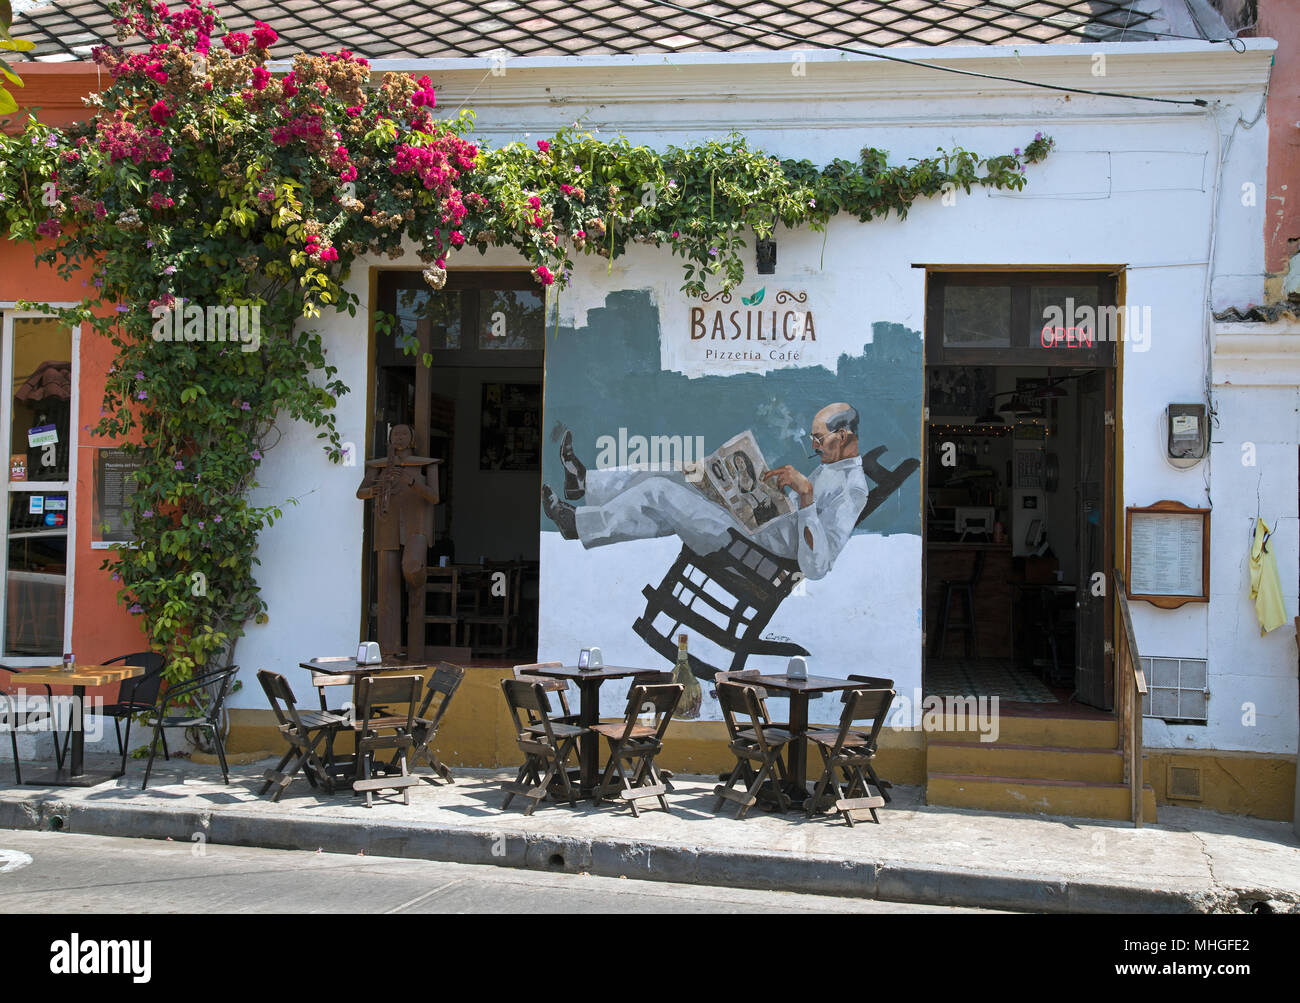 Wall mural on restaurant in Getsemani district of Cartagena, Colombia. Stock Photo